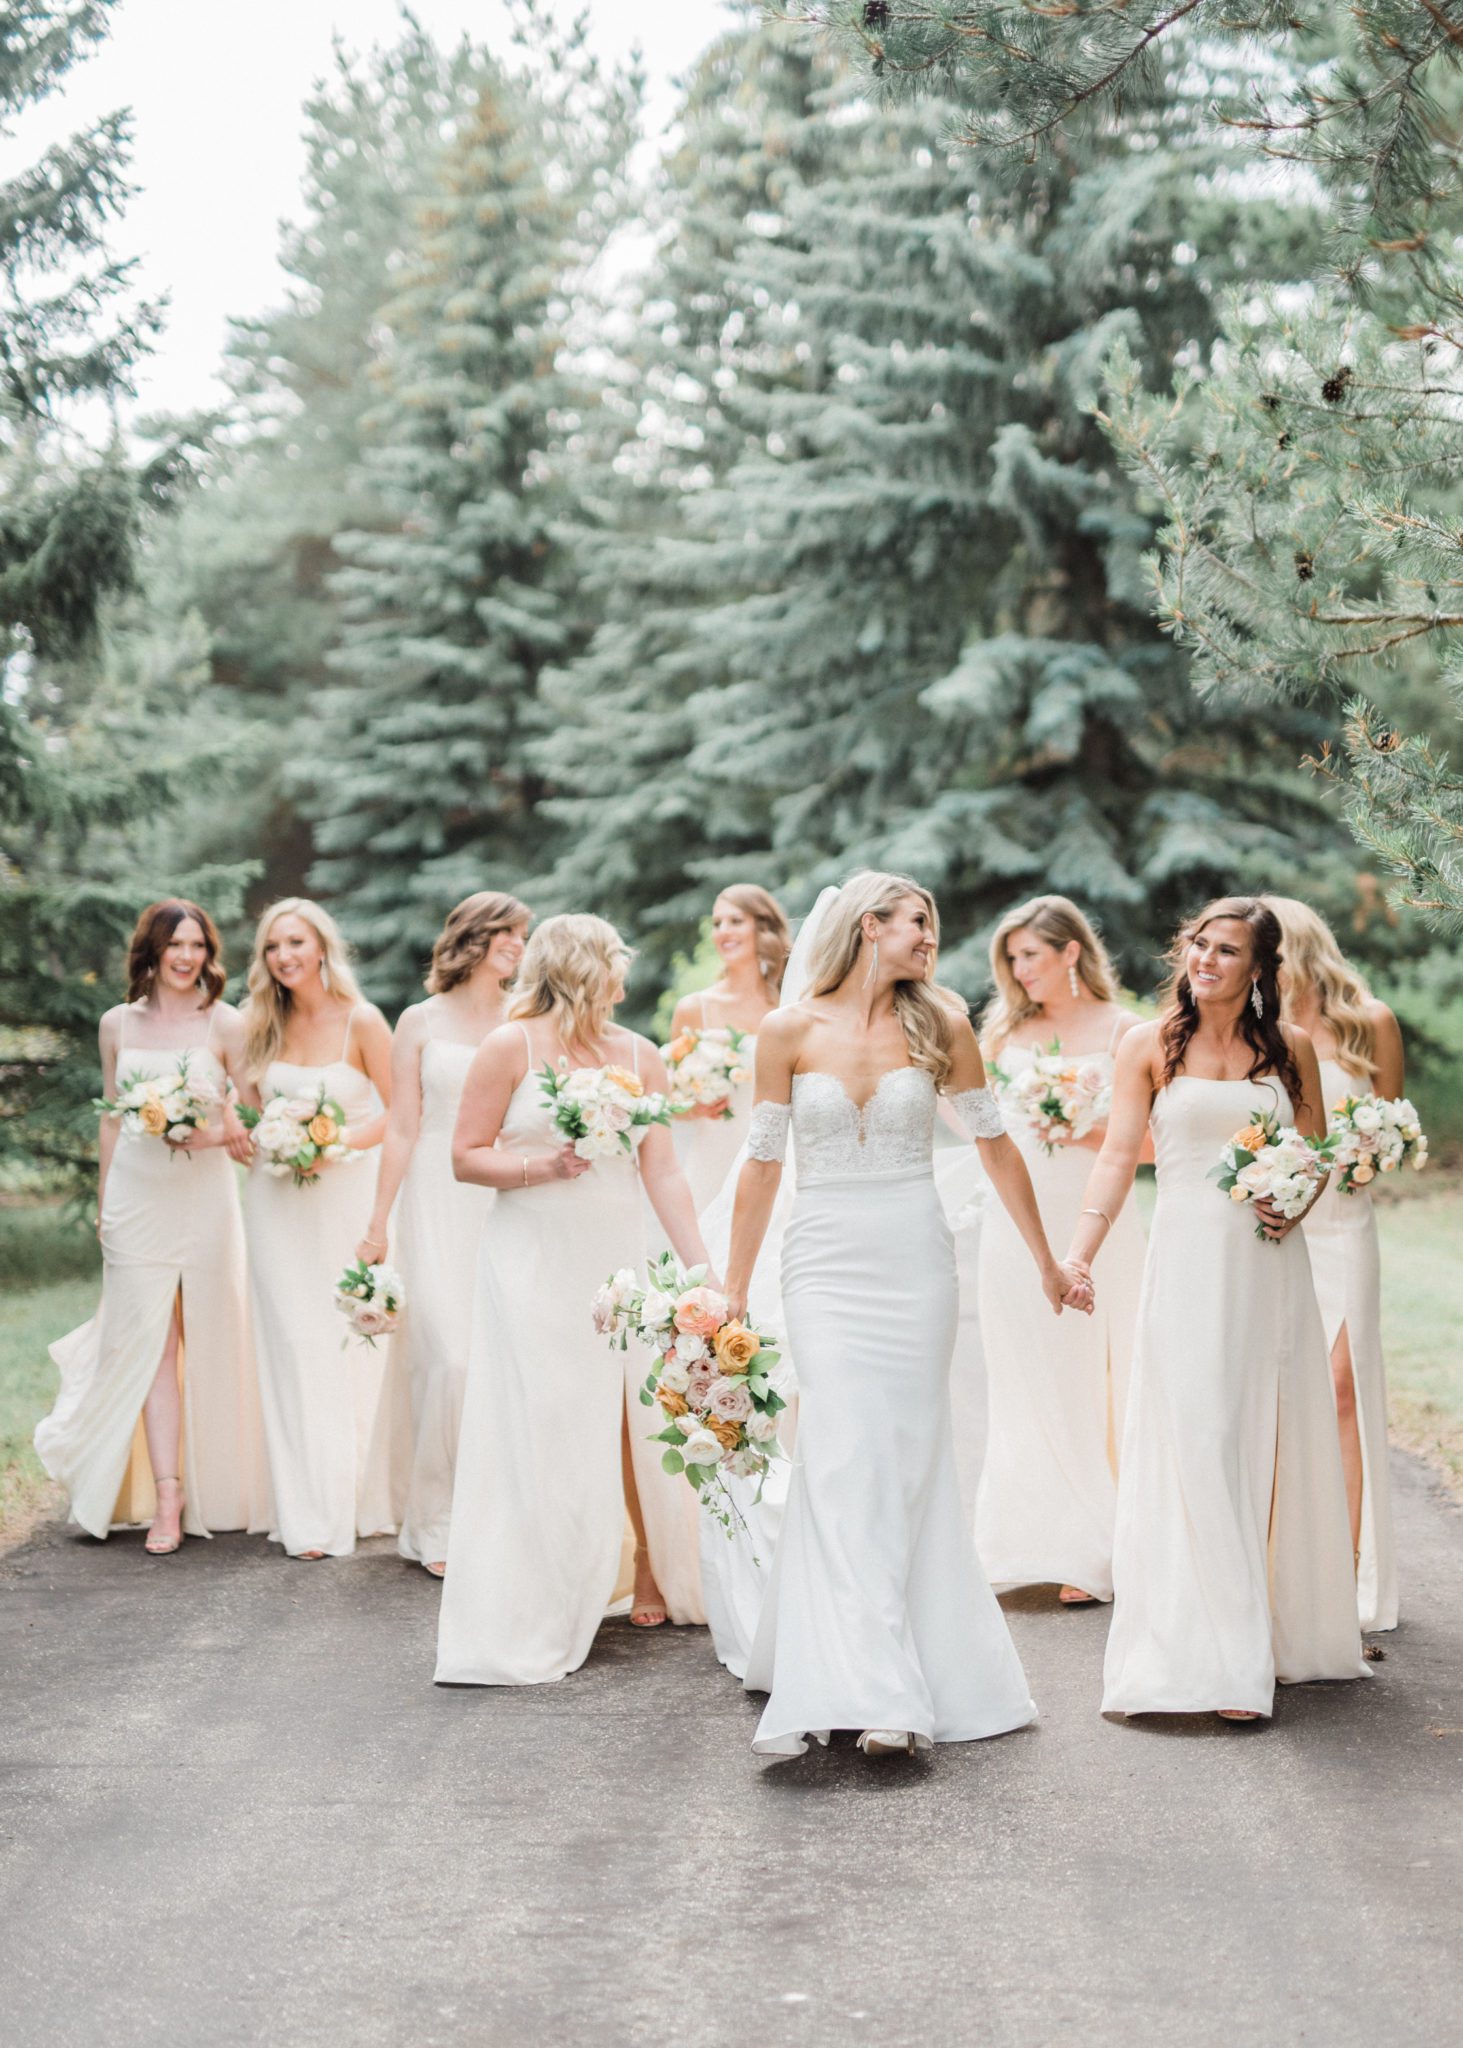 Bridesmaids in cream and blush bridesmaid gowns